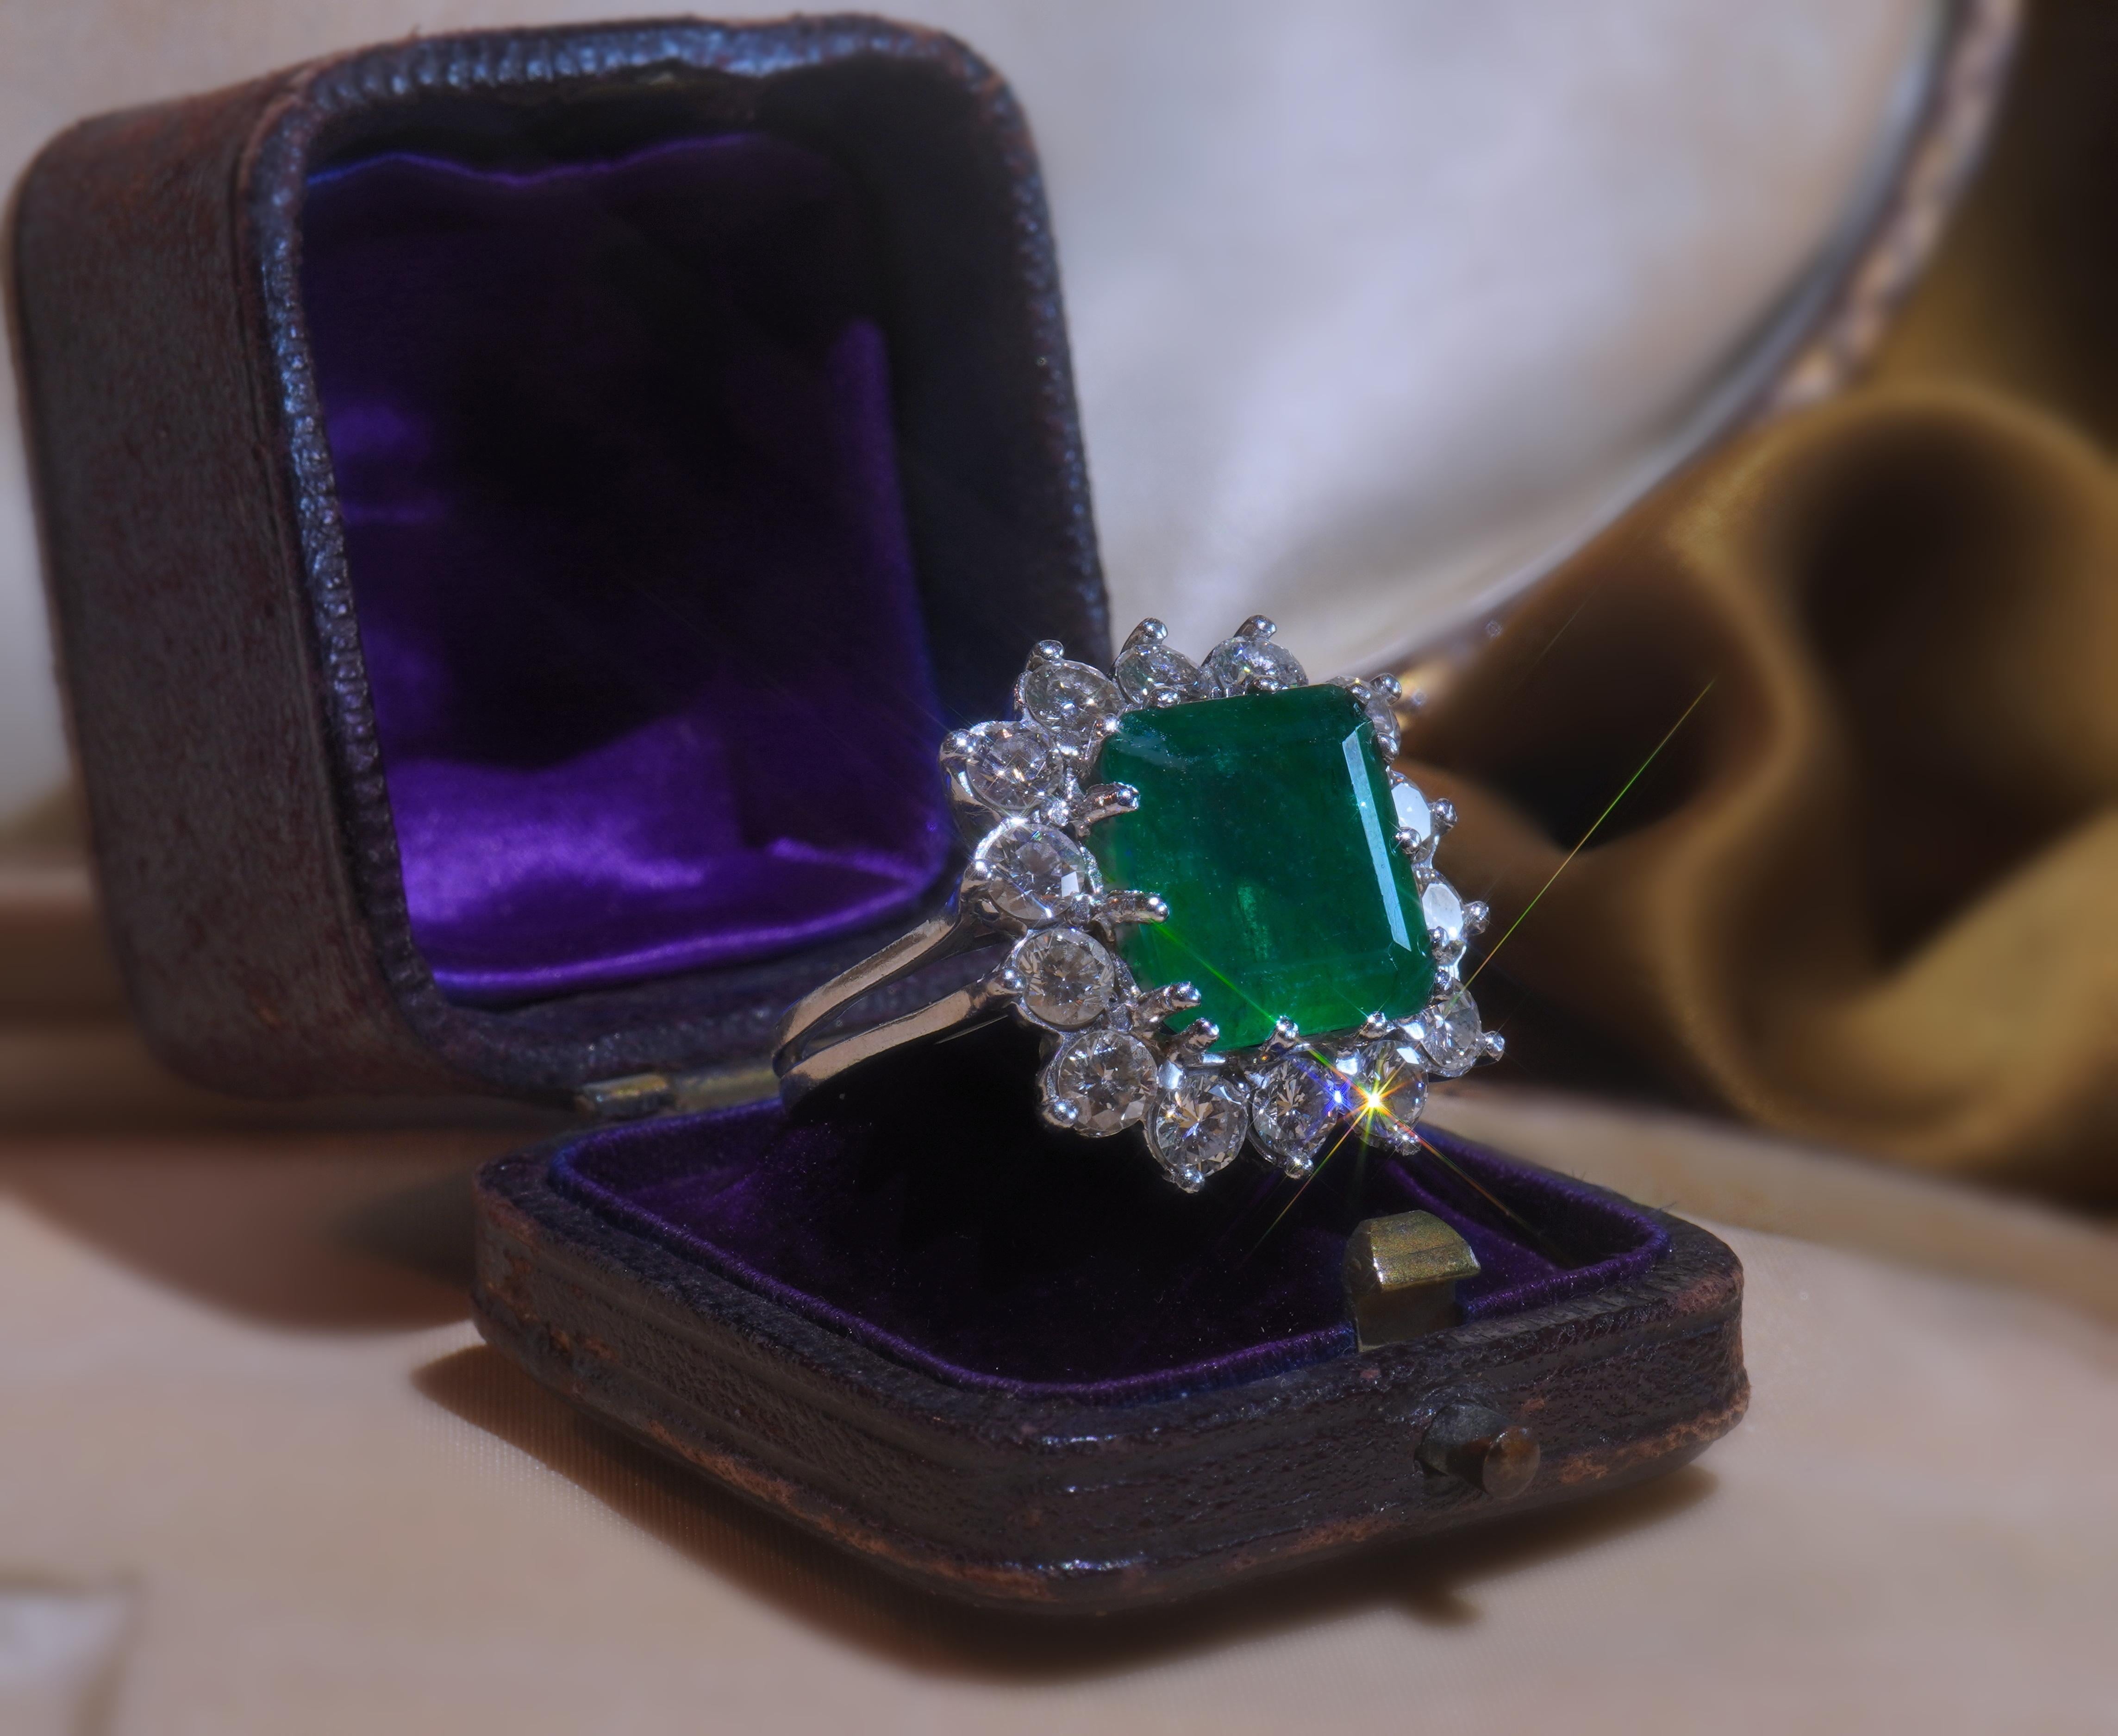 Old South Jewels proudly  presents...LUXURY.   BREATHTAKING HUGE  GIA CERTIFIED 9.15 CARAT EMERALD & DIAMOND VINTAGE PLATINUM RING & BOX!   (CROWNED WITH 2.95 CARATS OF SPARKLING BIG 15 POINT DIAMONDS.)  RUSSIAN EMERALDS ARE VERY RARE AND COMMAND